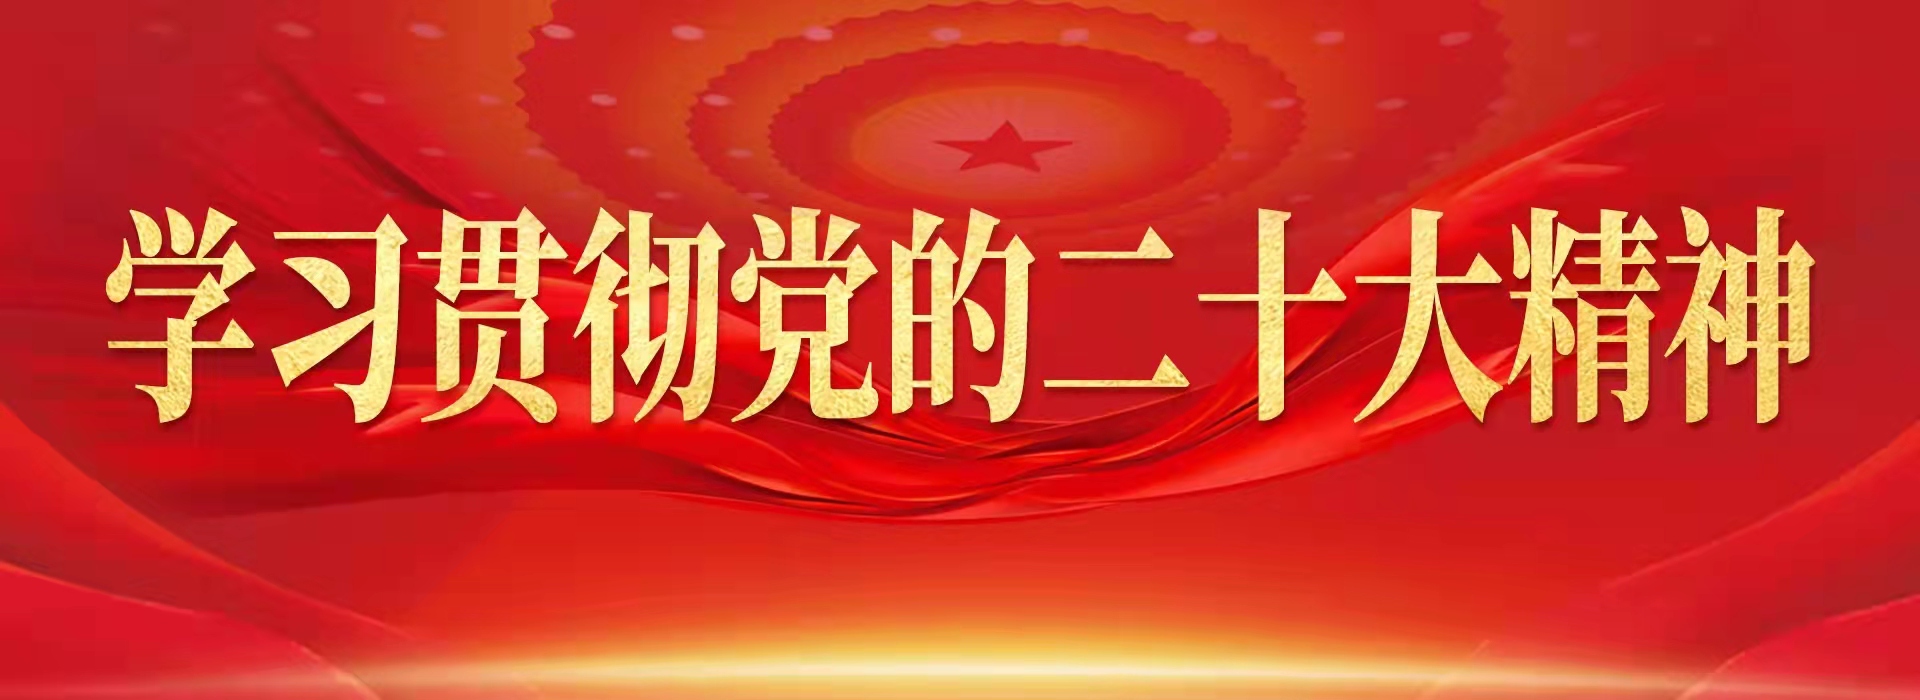  Study and implement the spirit of the 20th CPC National Congress